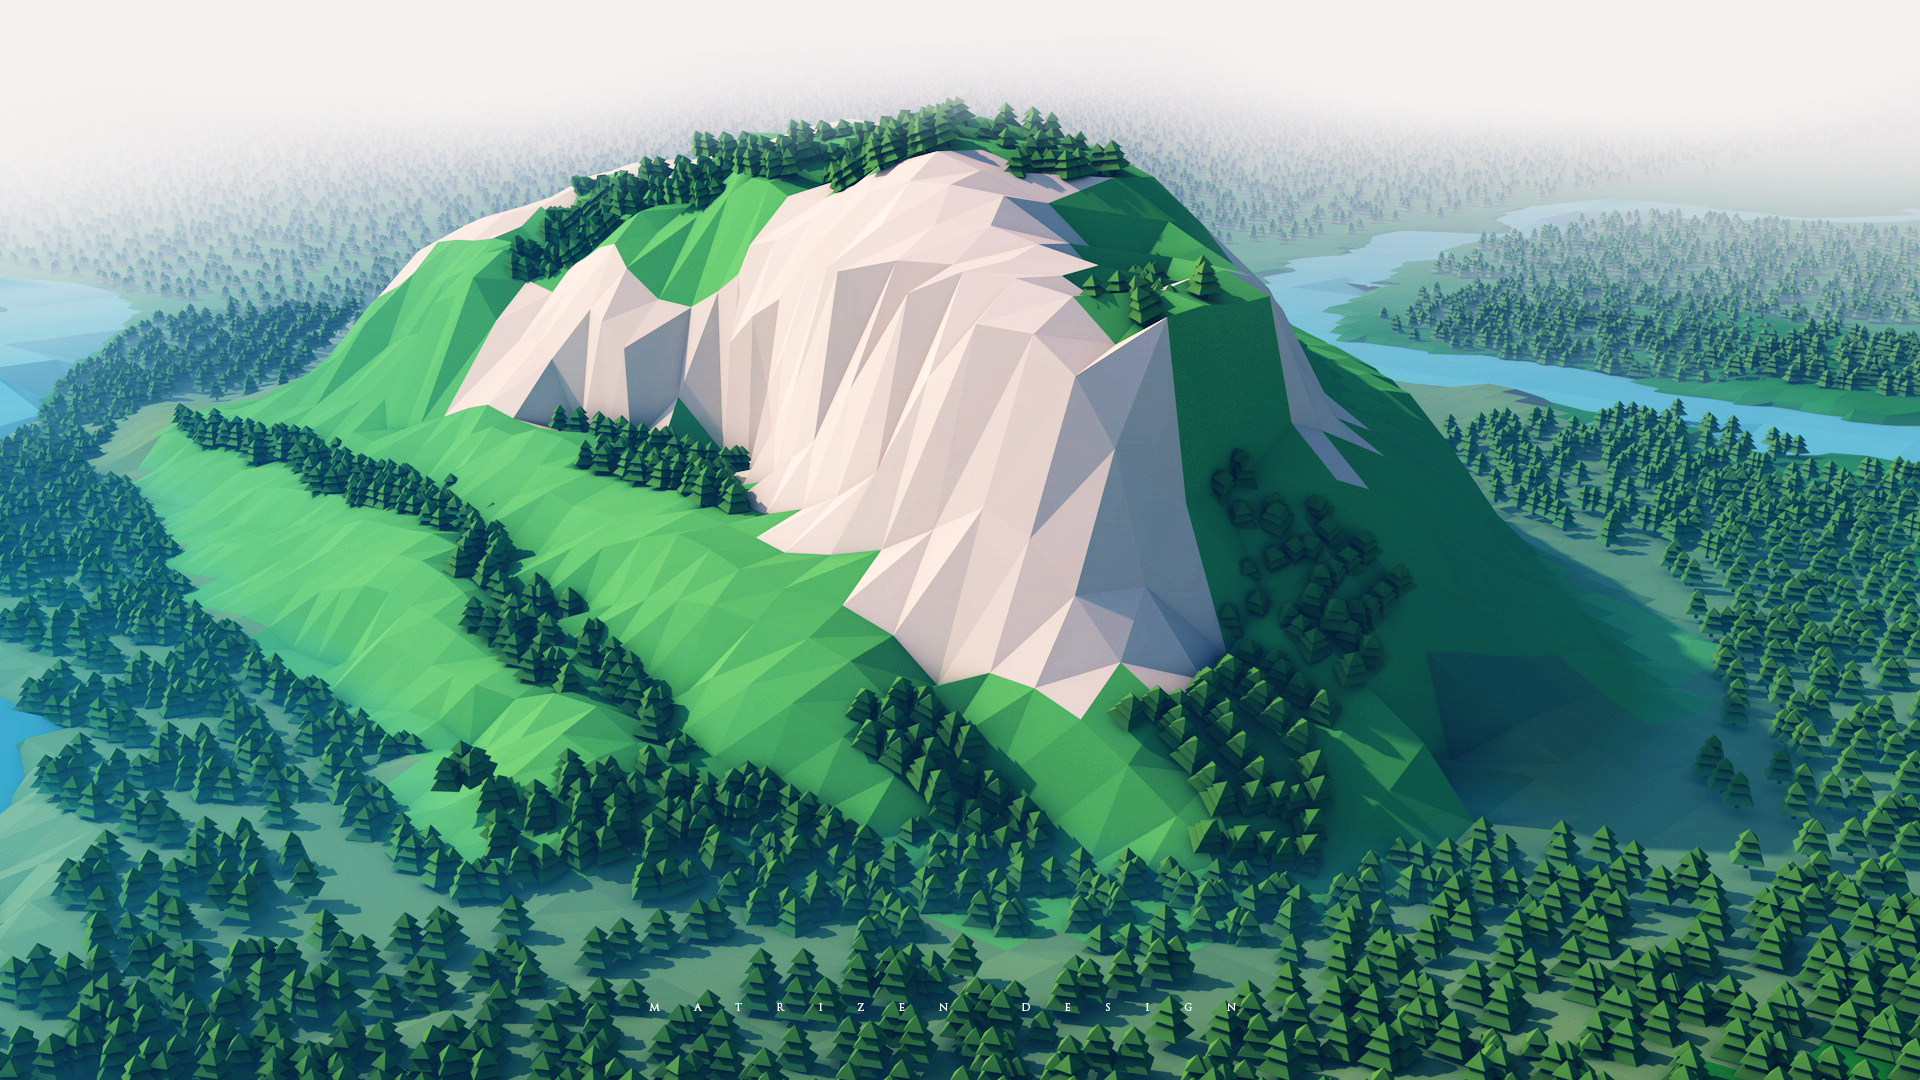 General 1920x1080 low poly CGI Cinema 4D digital art mountains forest river sky landscape photoshopped